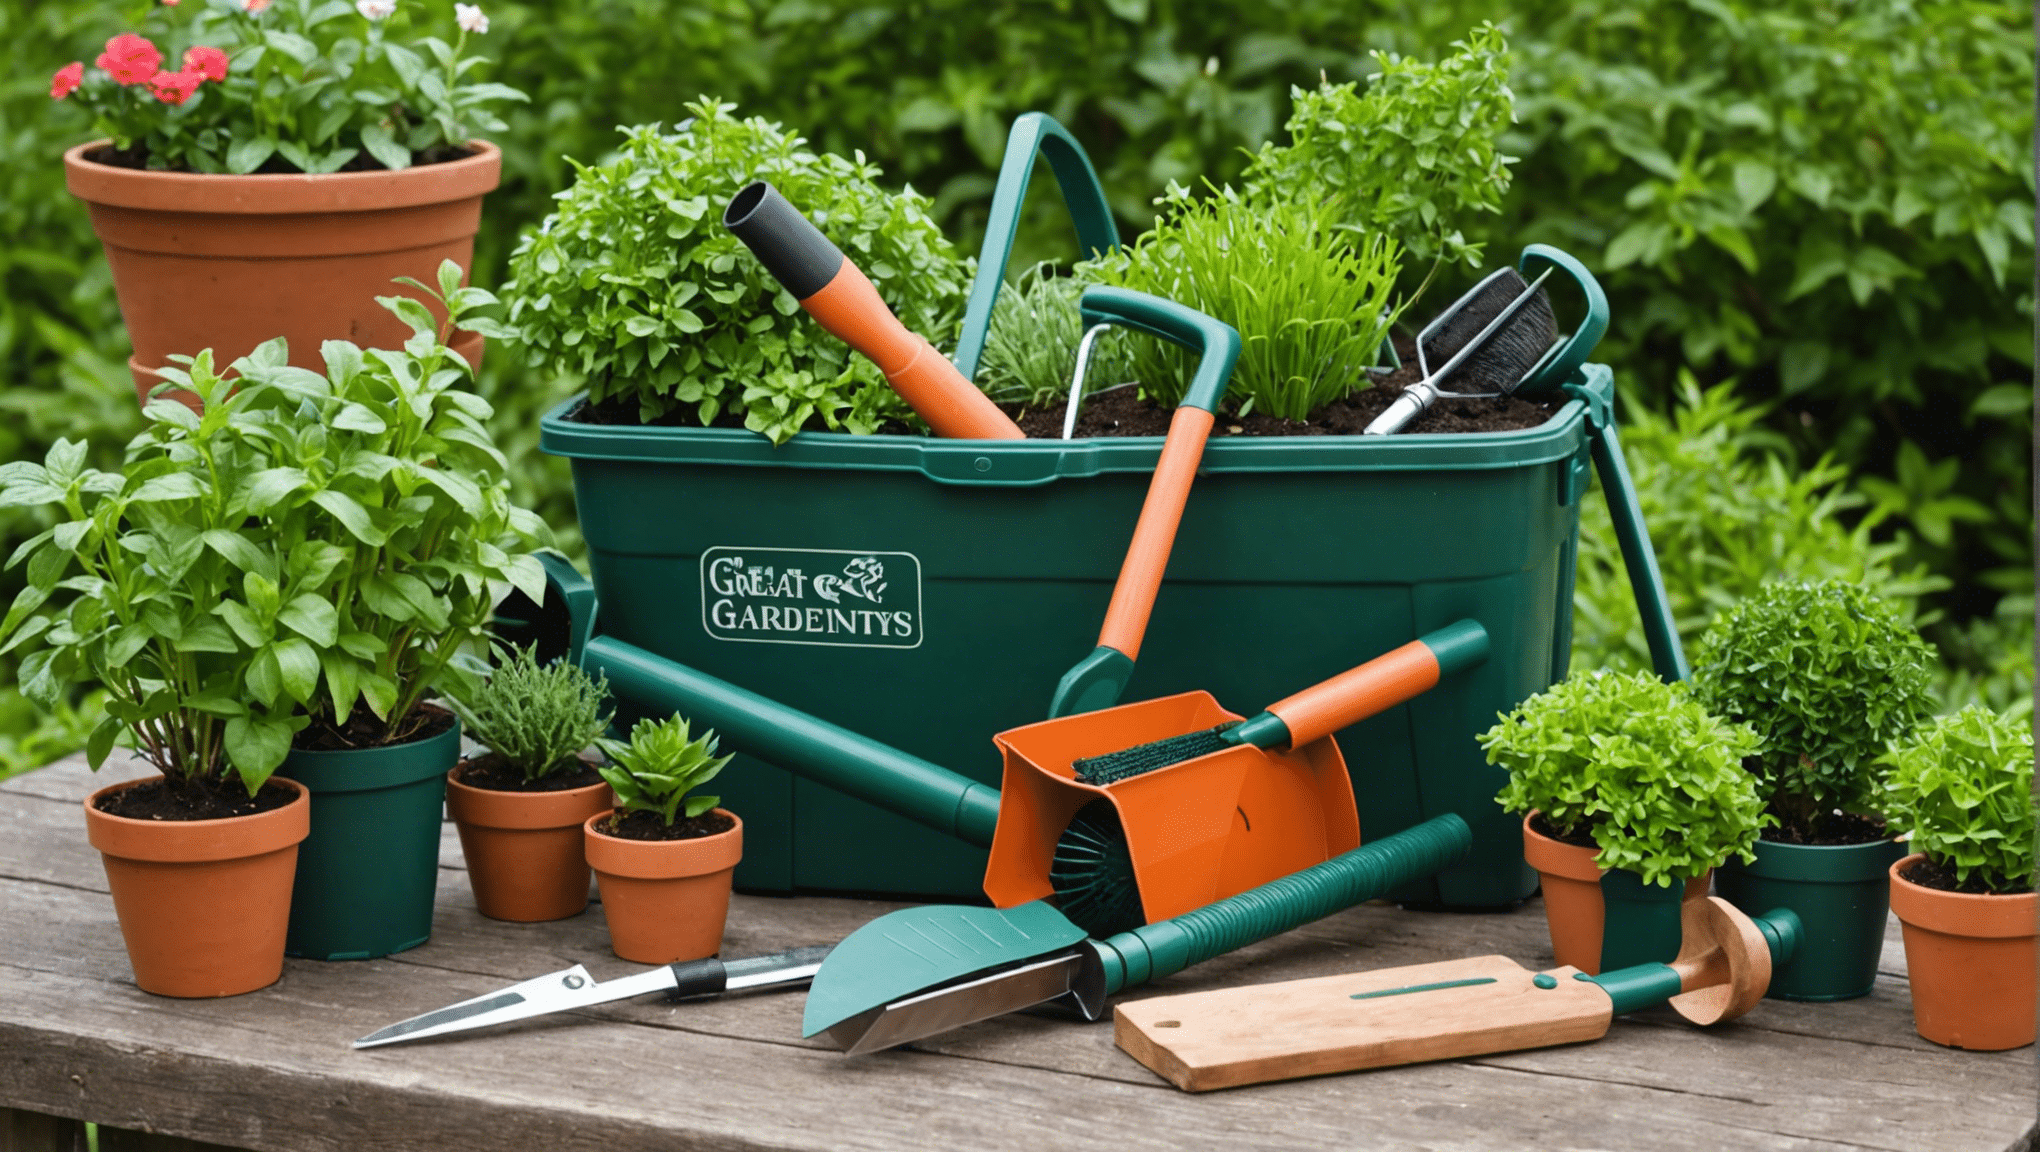 looking for great gardening gifts for men? check out our curated selection of unique and practical gifts perfect for the green-thumbed guy in your life.